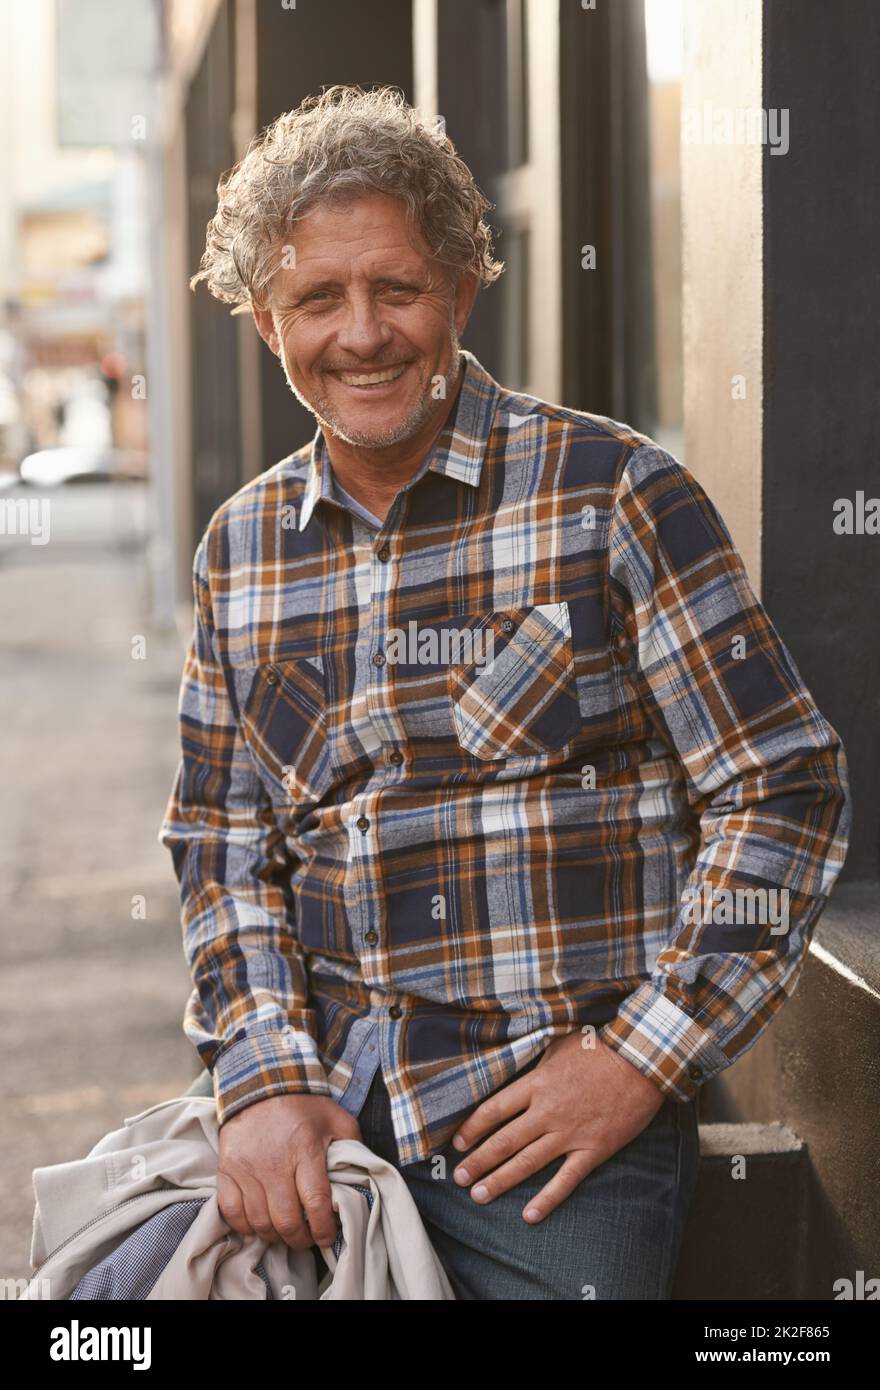 Style is timeless. Portrait of a friendly-looking middle aged man outside. Stock Photo